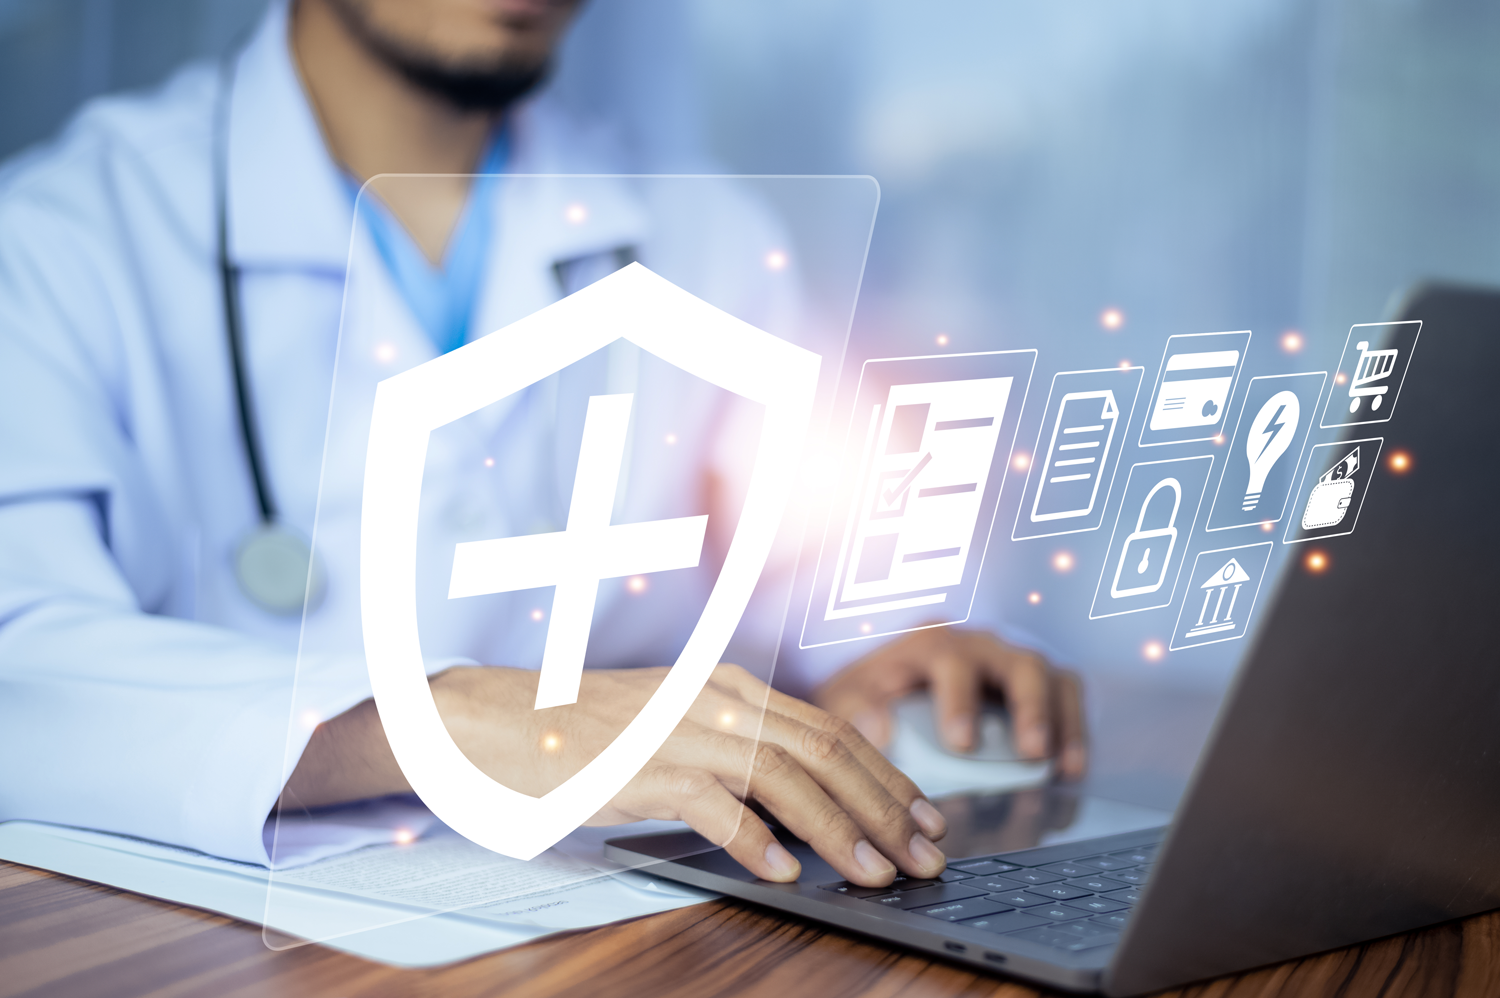 AiOmed transforms long-term care delivery with the first Clinical Firewall